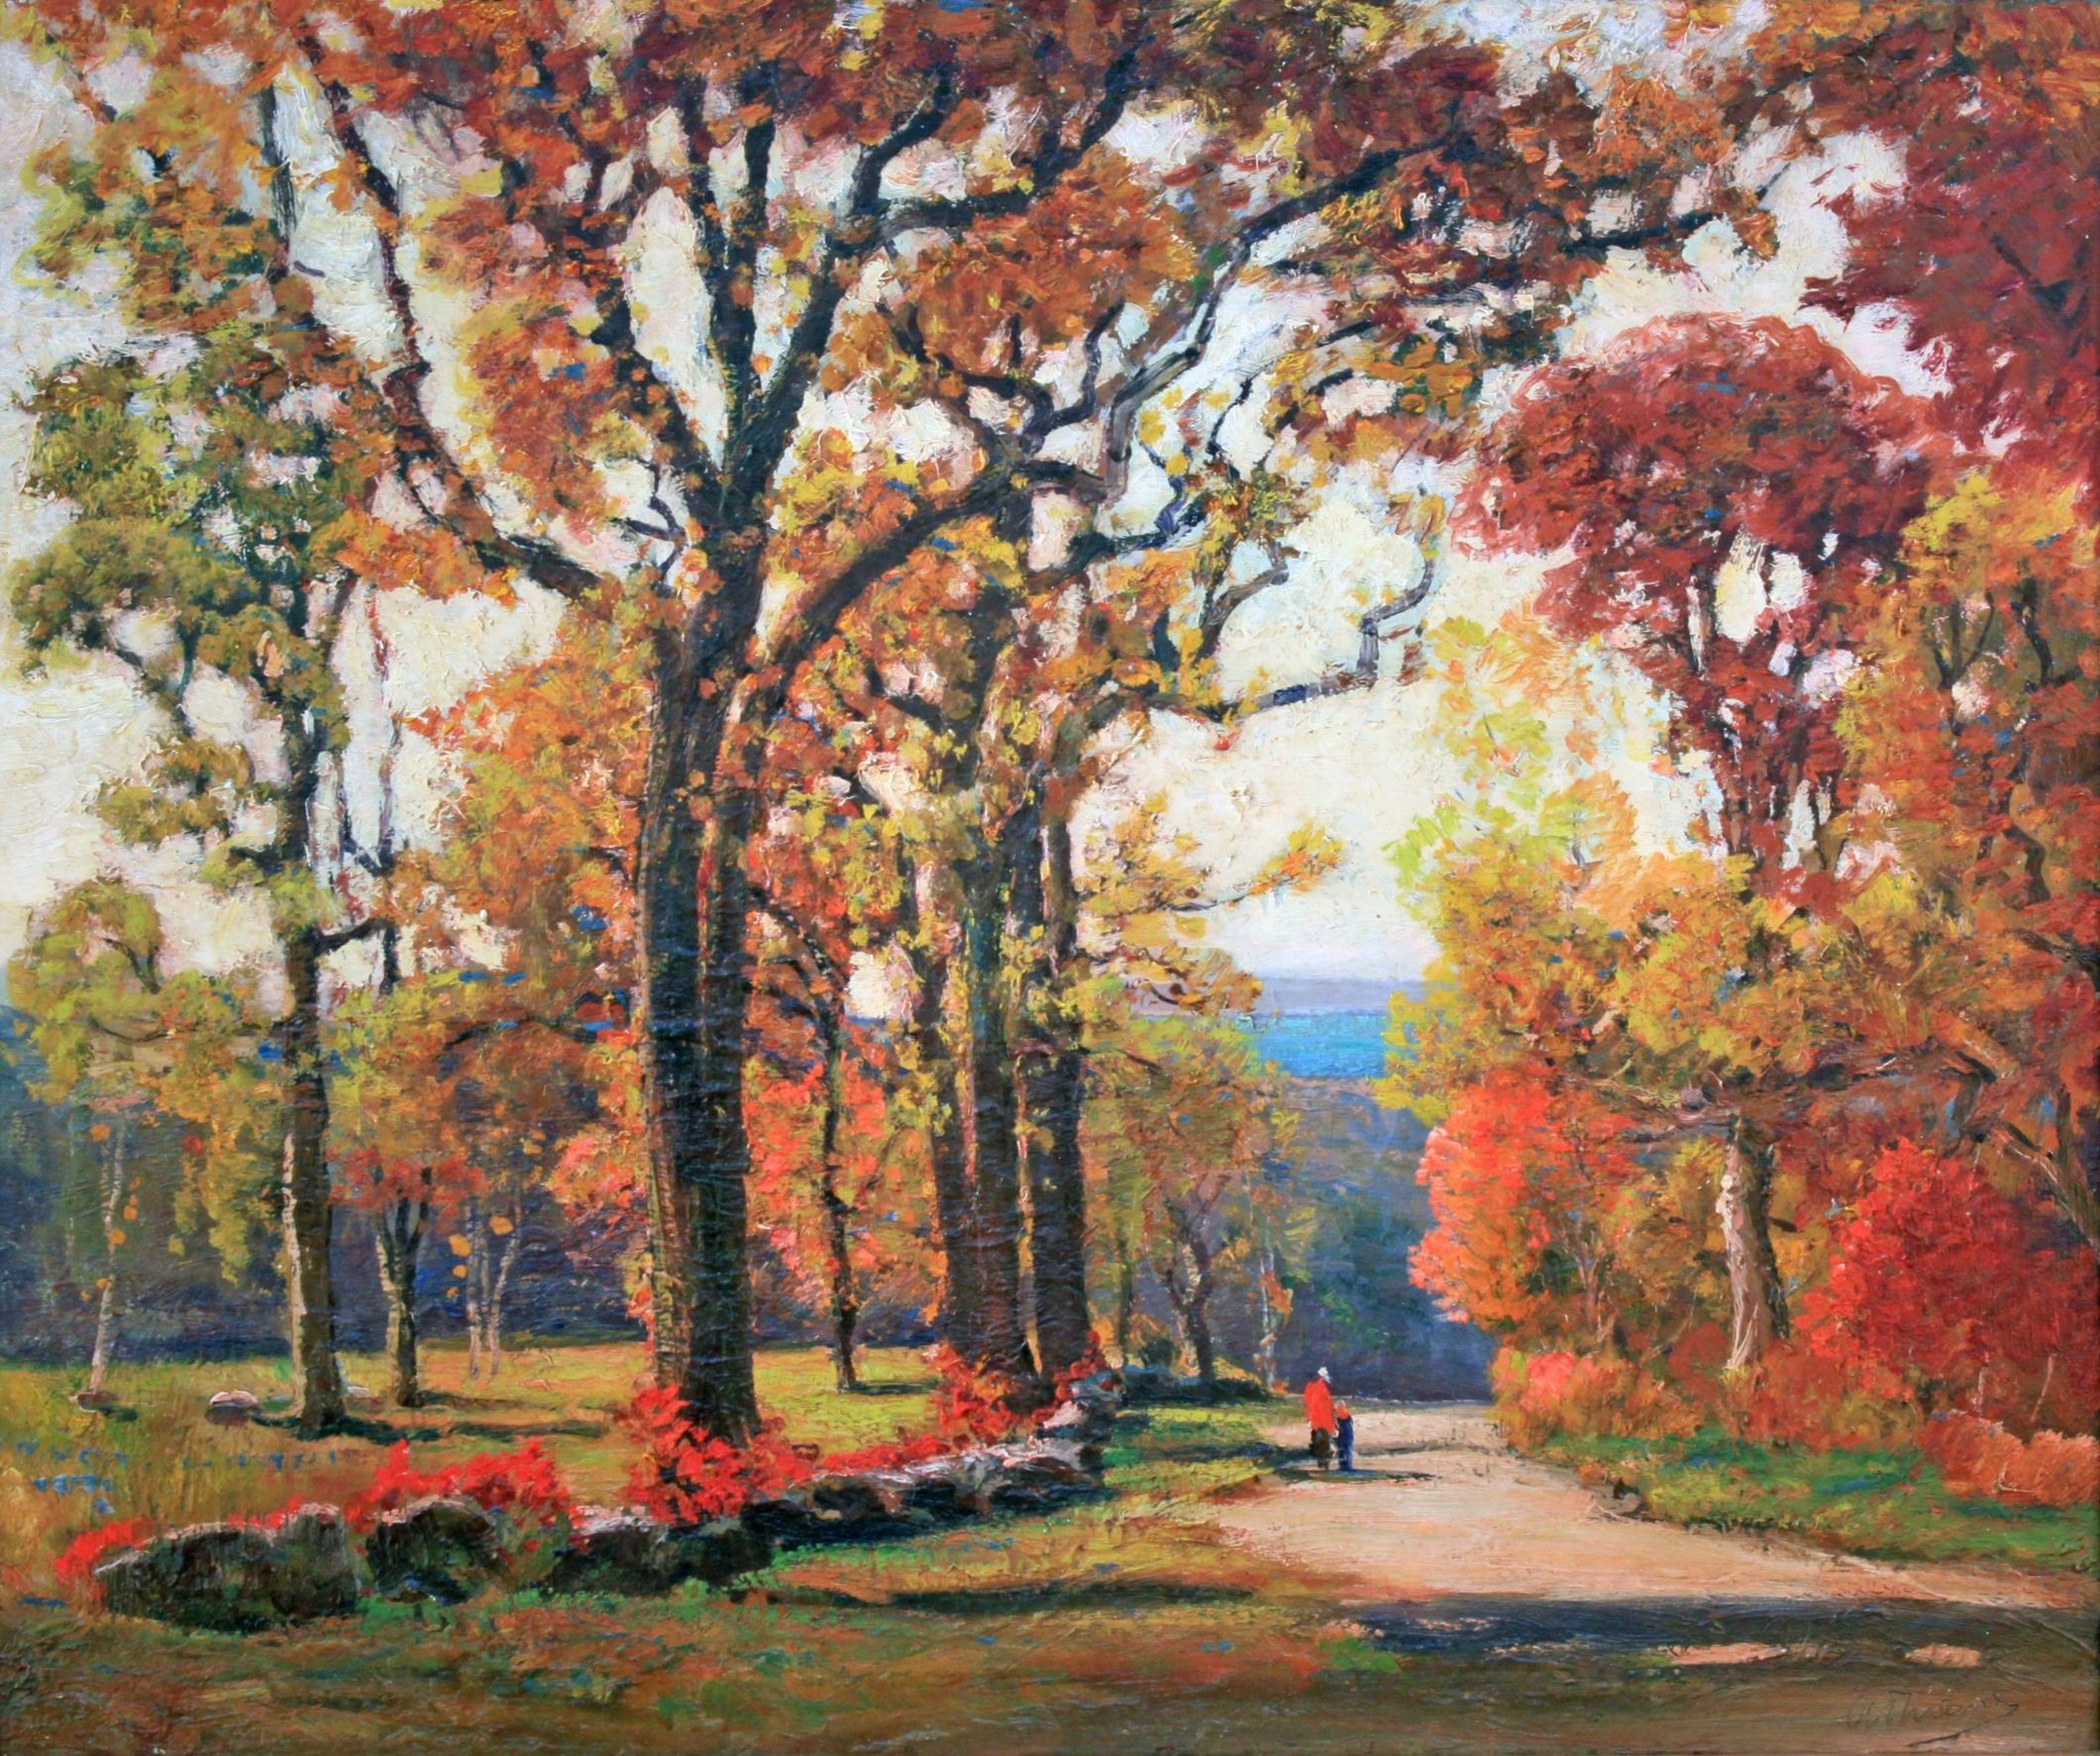  Feature Consignment:  Lot 175 - Anthony Thieme (1888-1954)   Autumn Leaves, Pigeon Cove  oil on canvas, 30 x 36 in. 